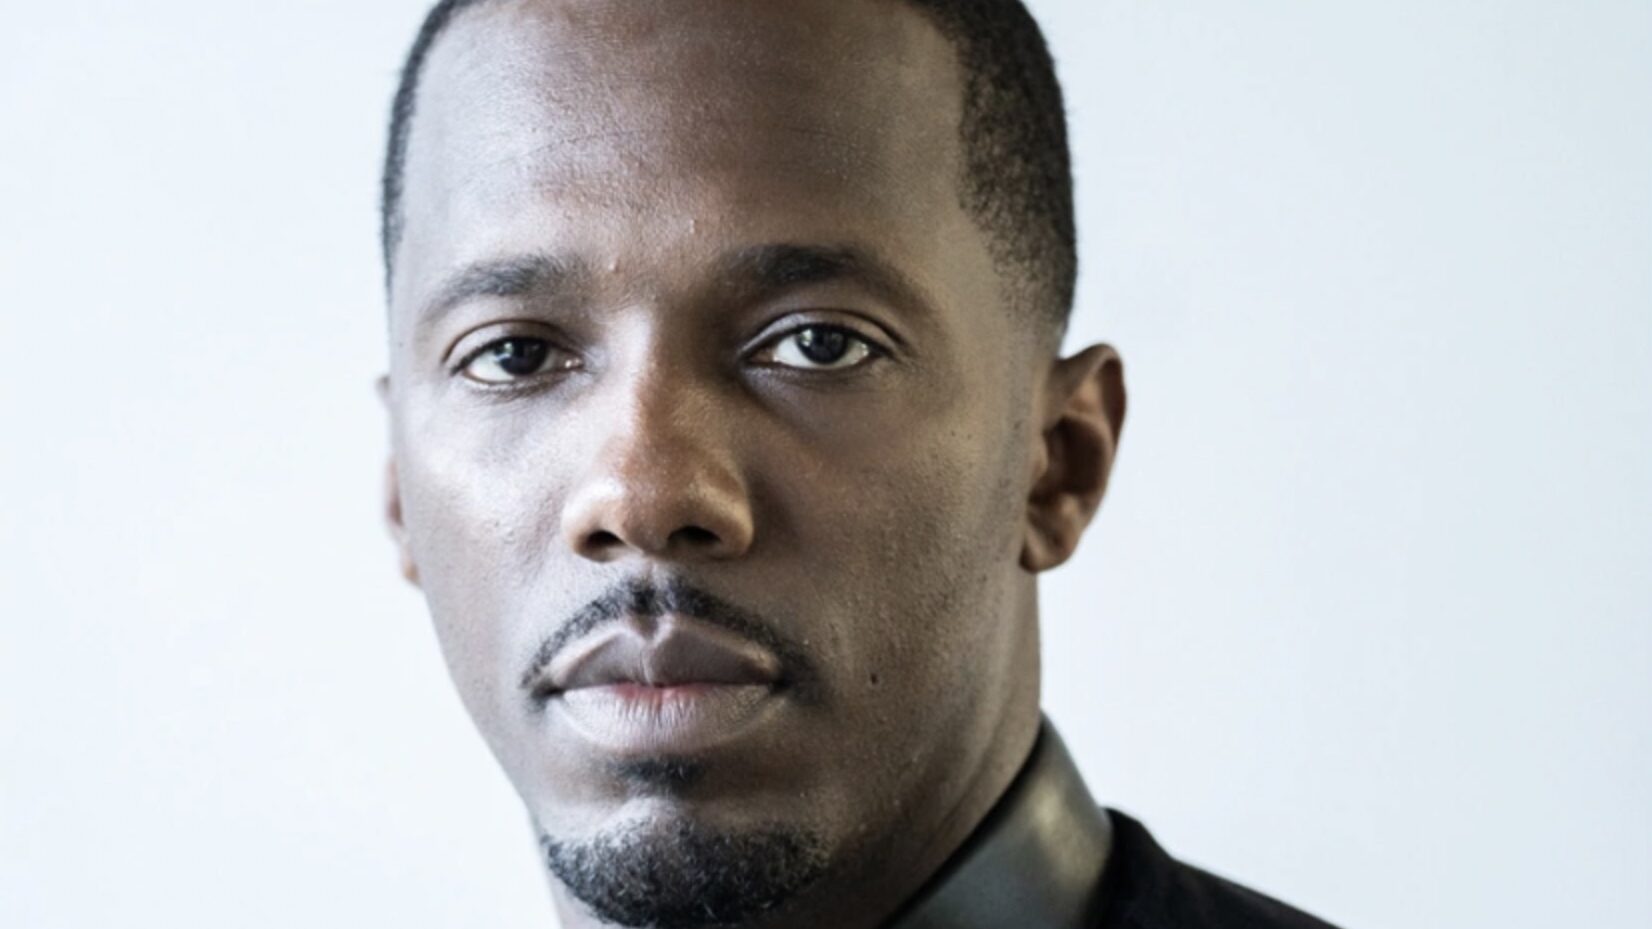 Top sports agent Rich Paul joins Live Nation Board of Directors – Music Business Worldwide